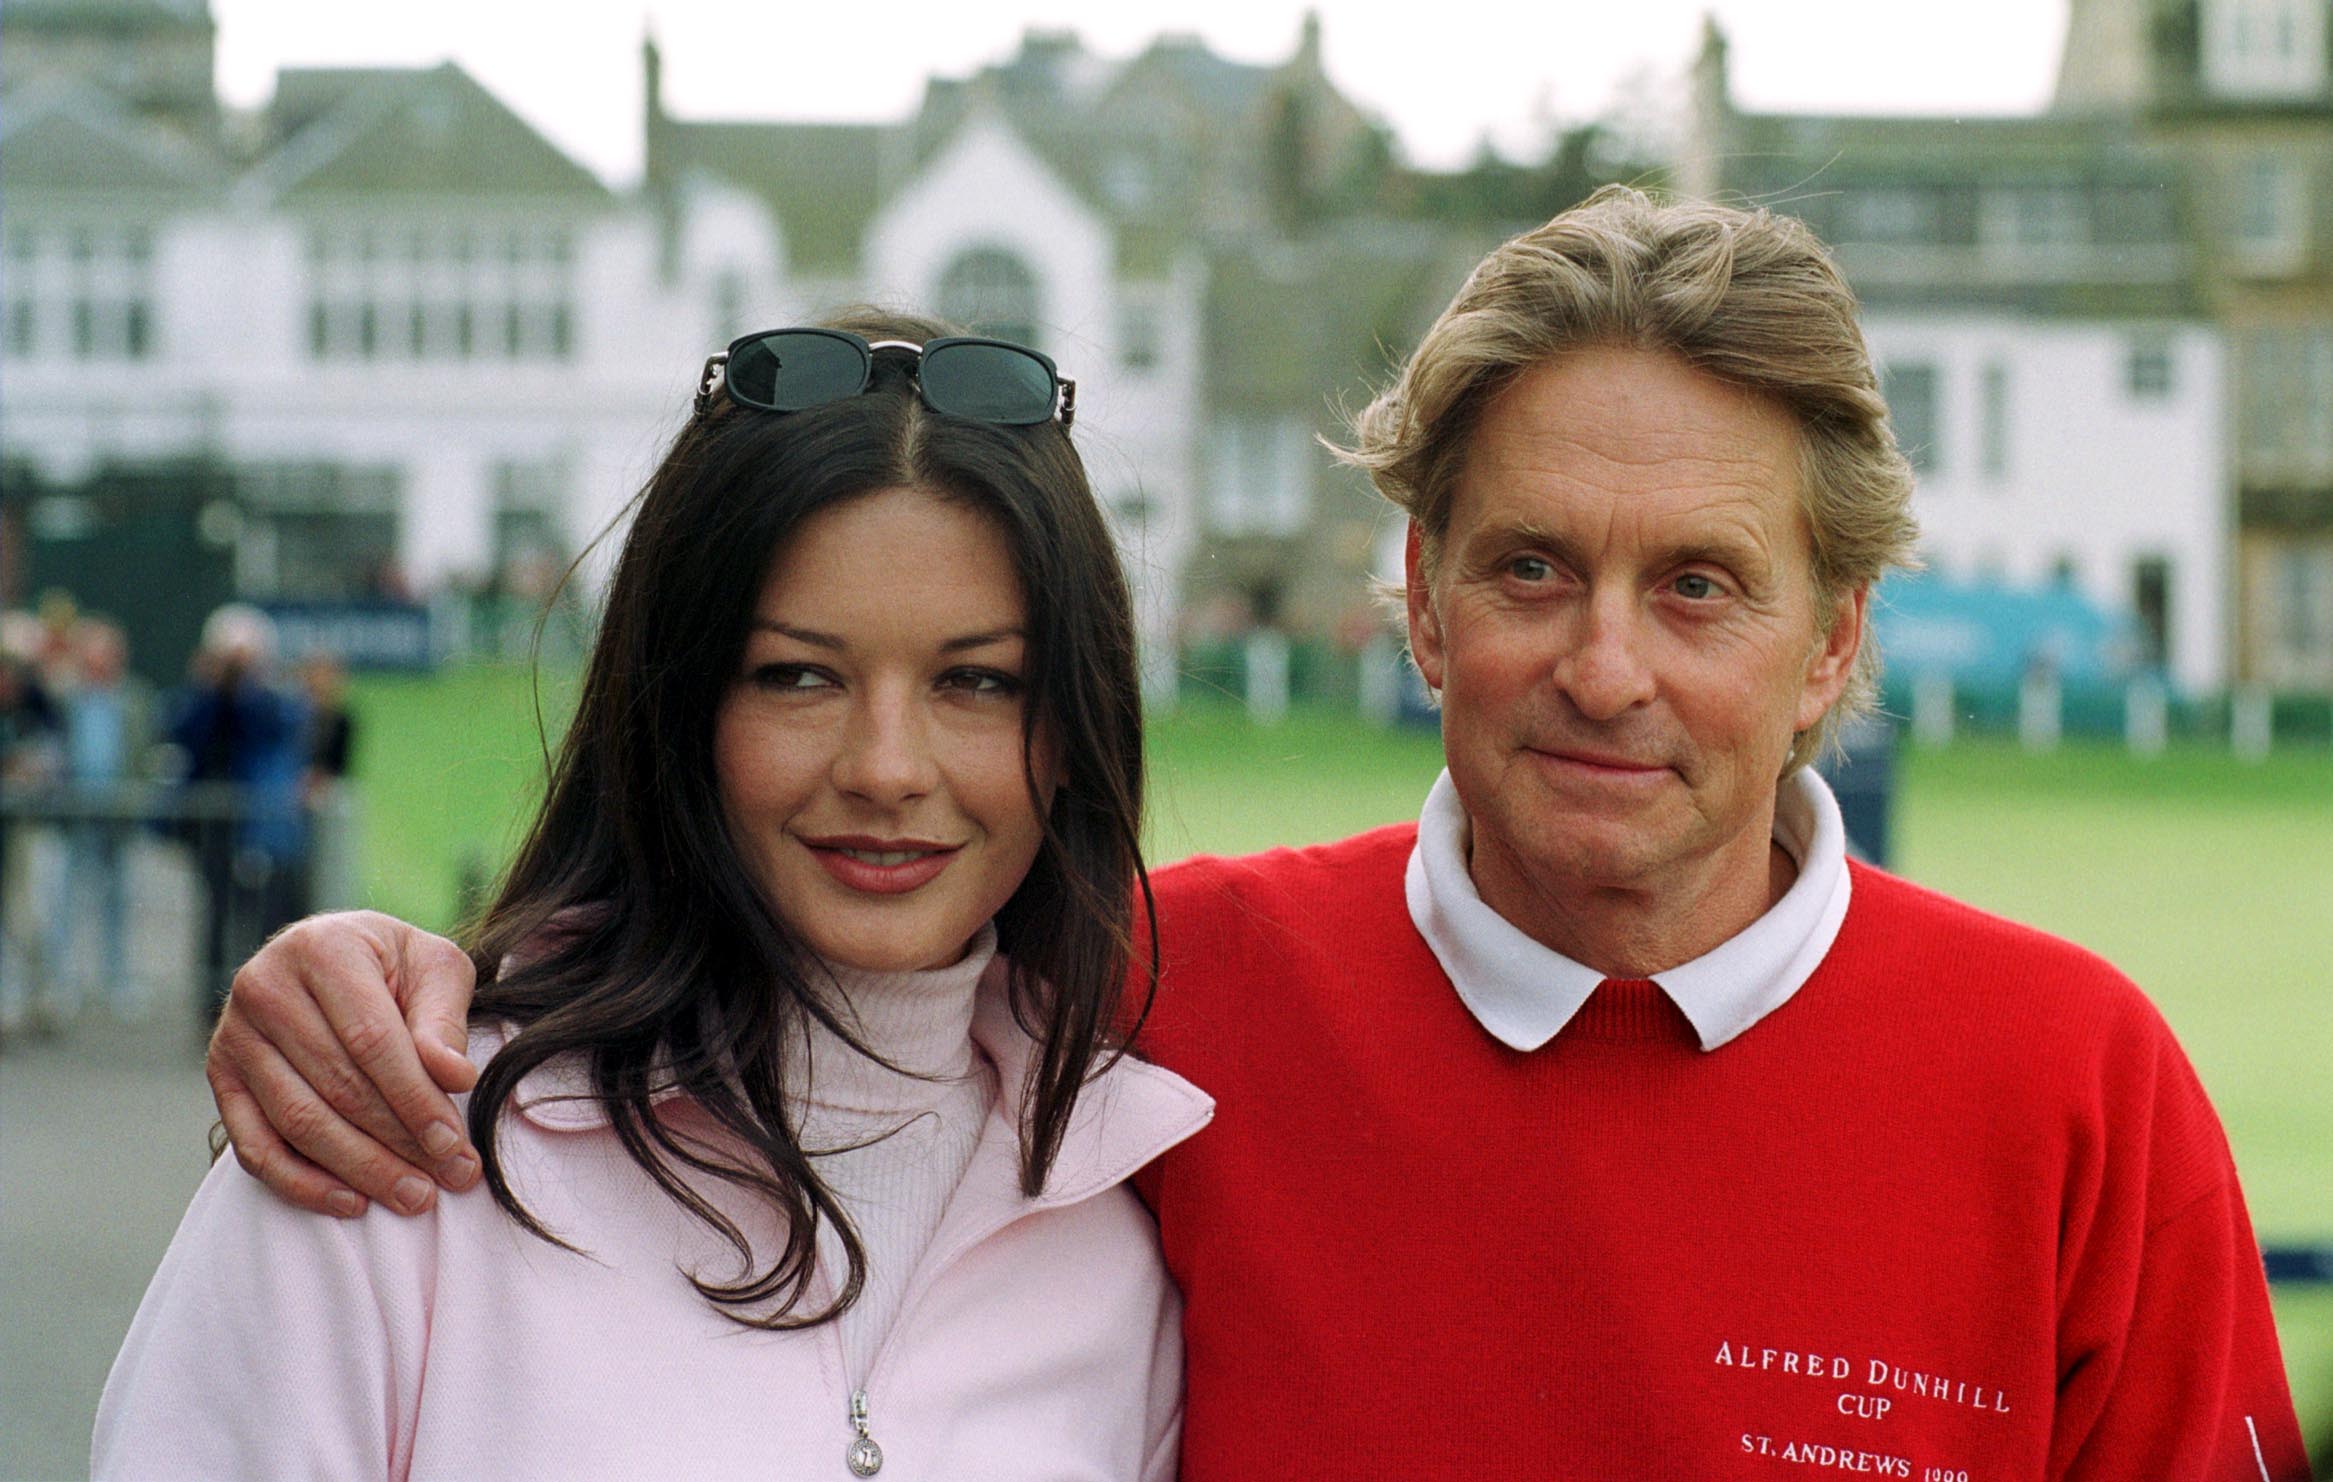 Catherine Zeta-Jones and Michael Douglas relax on St Andrews Golf Course, where Mr. Douglas takes part in the Alfred Dunhill Cup celebrity pro-am. Tournament. | Source: Getty Images